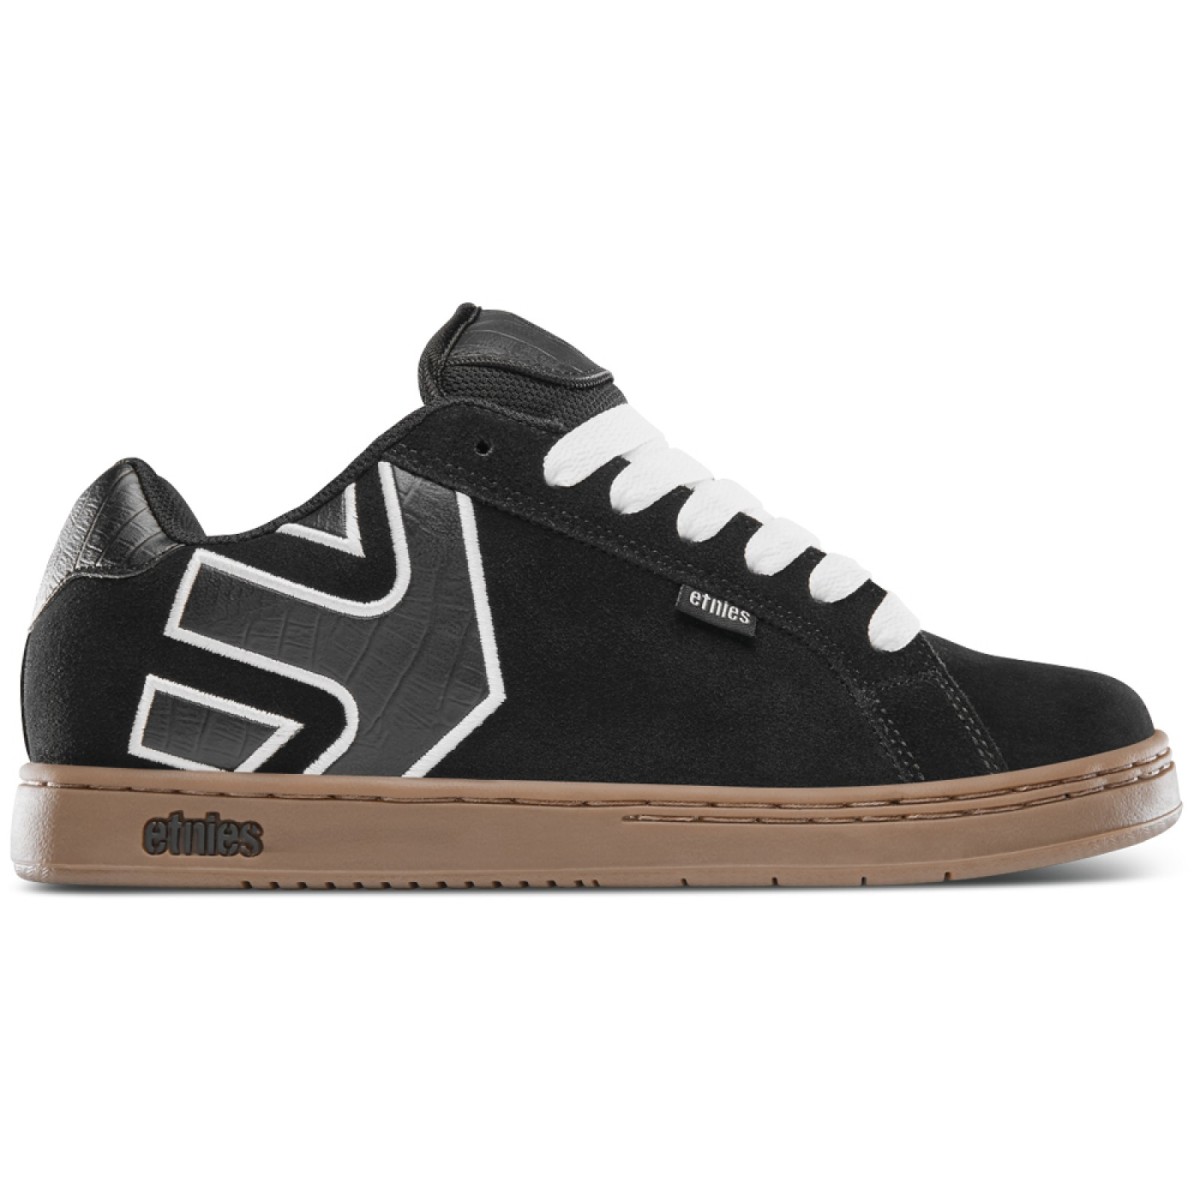 Etnies Fader Skate Shoes The Fader is a long-running etnies style with